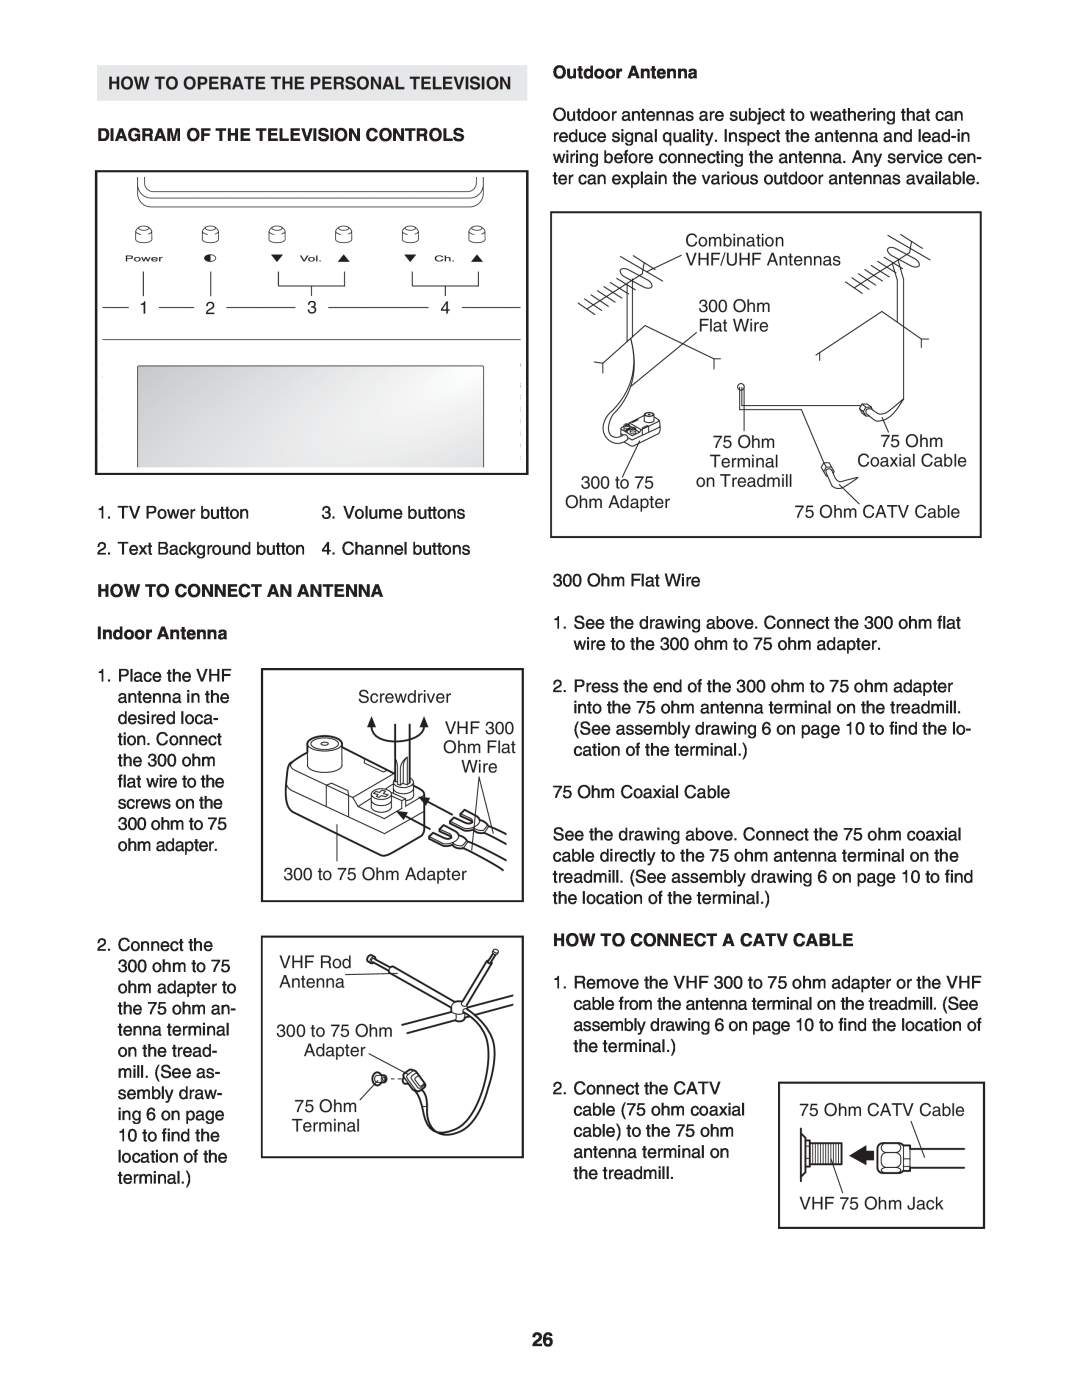 NordicTrack NTL2495.3 manual How To Operate The Personal Television, Outdoor Antenna, Diagram Of The Television Controls 